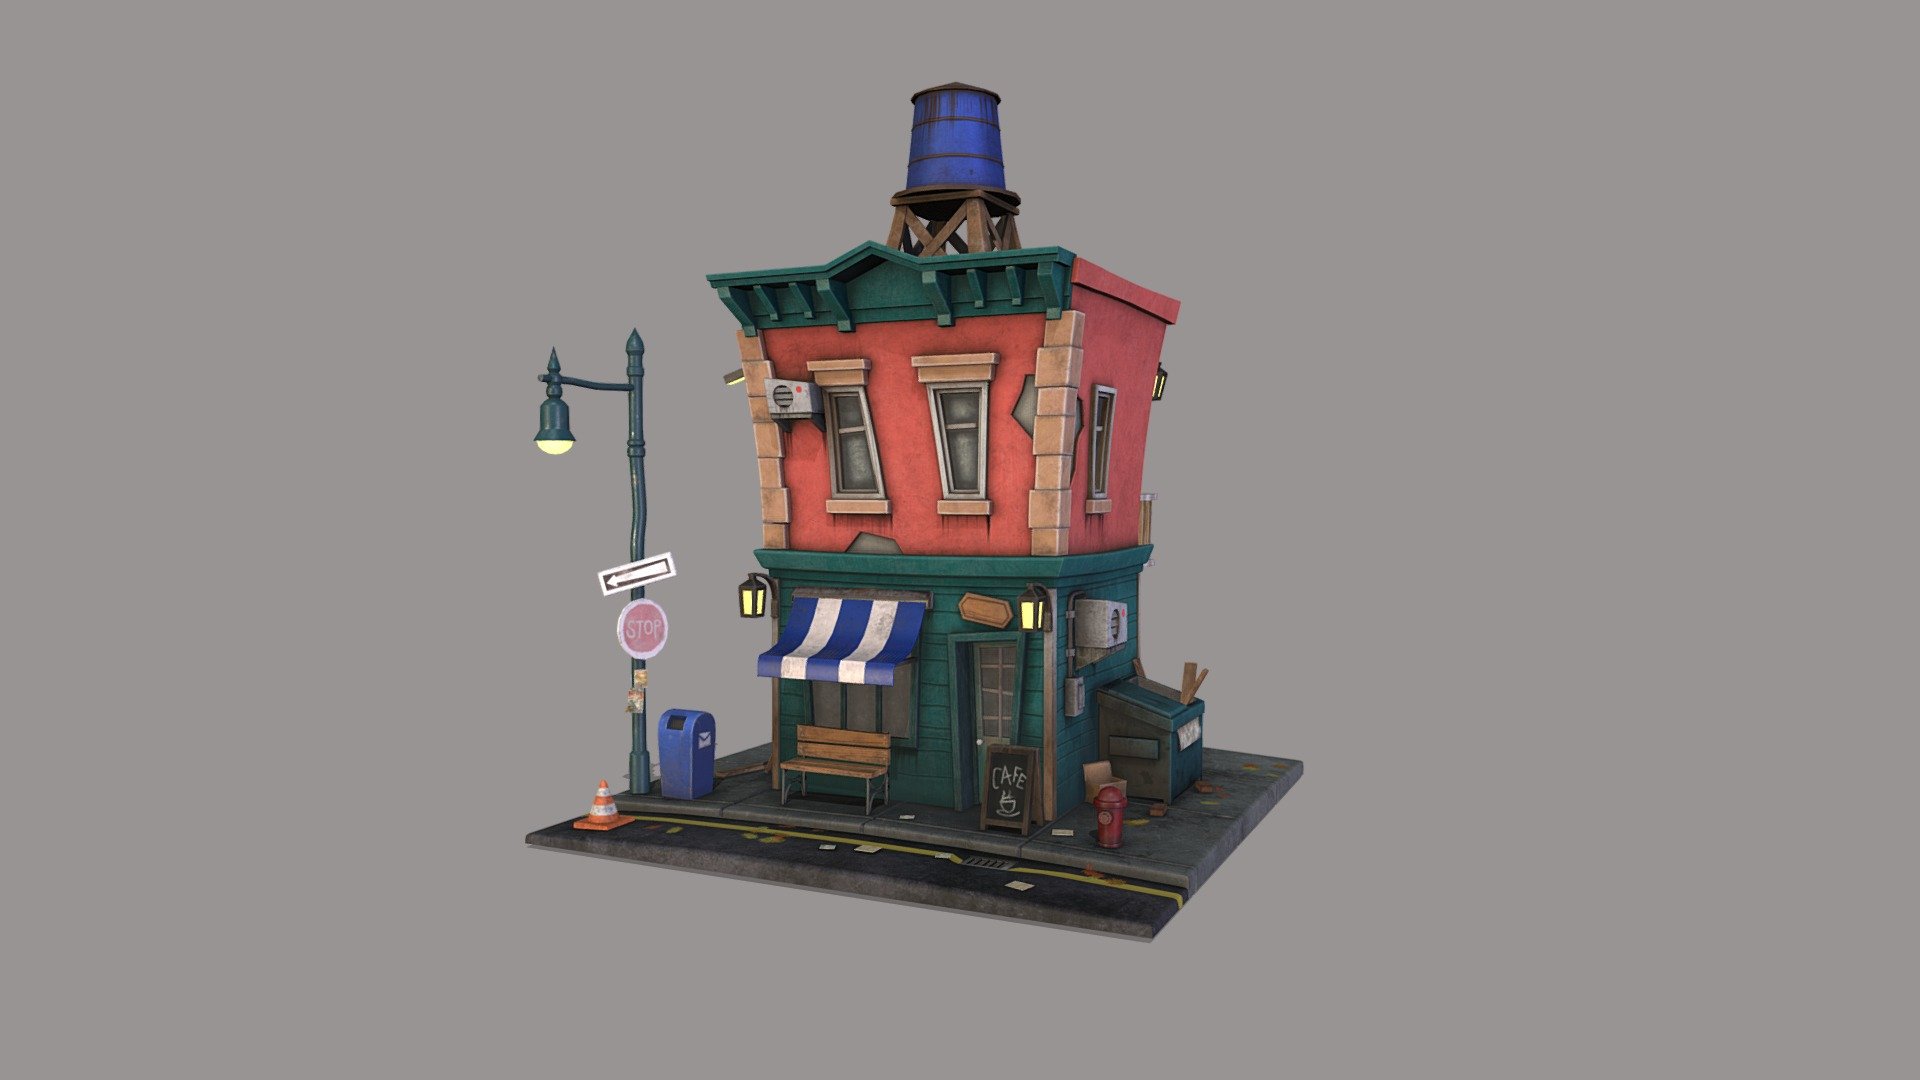 A personal project I've been working on since I do more realistic at work.
It was fun to dip back into a stylized project!
Modeled in maya. Textured in painter.
Original idea and concept by Igor Rozovny - Stylized NY Cafe - 3D model by RachelBurrows3D 3d model